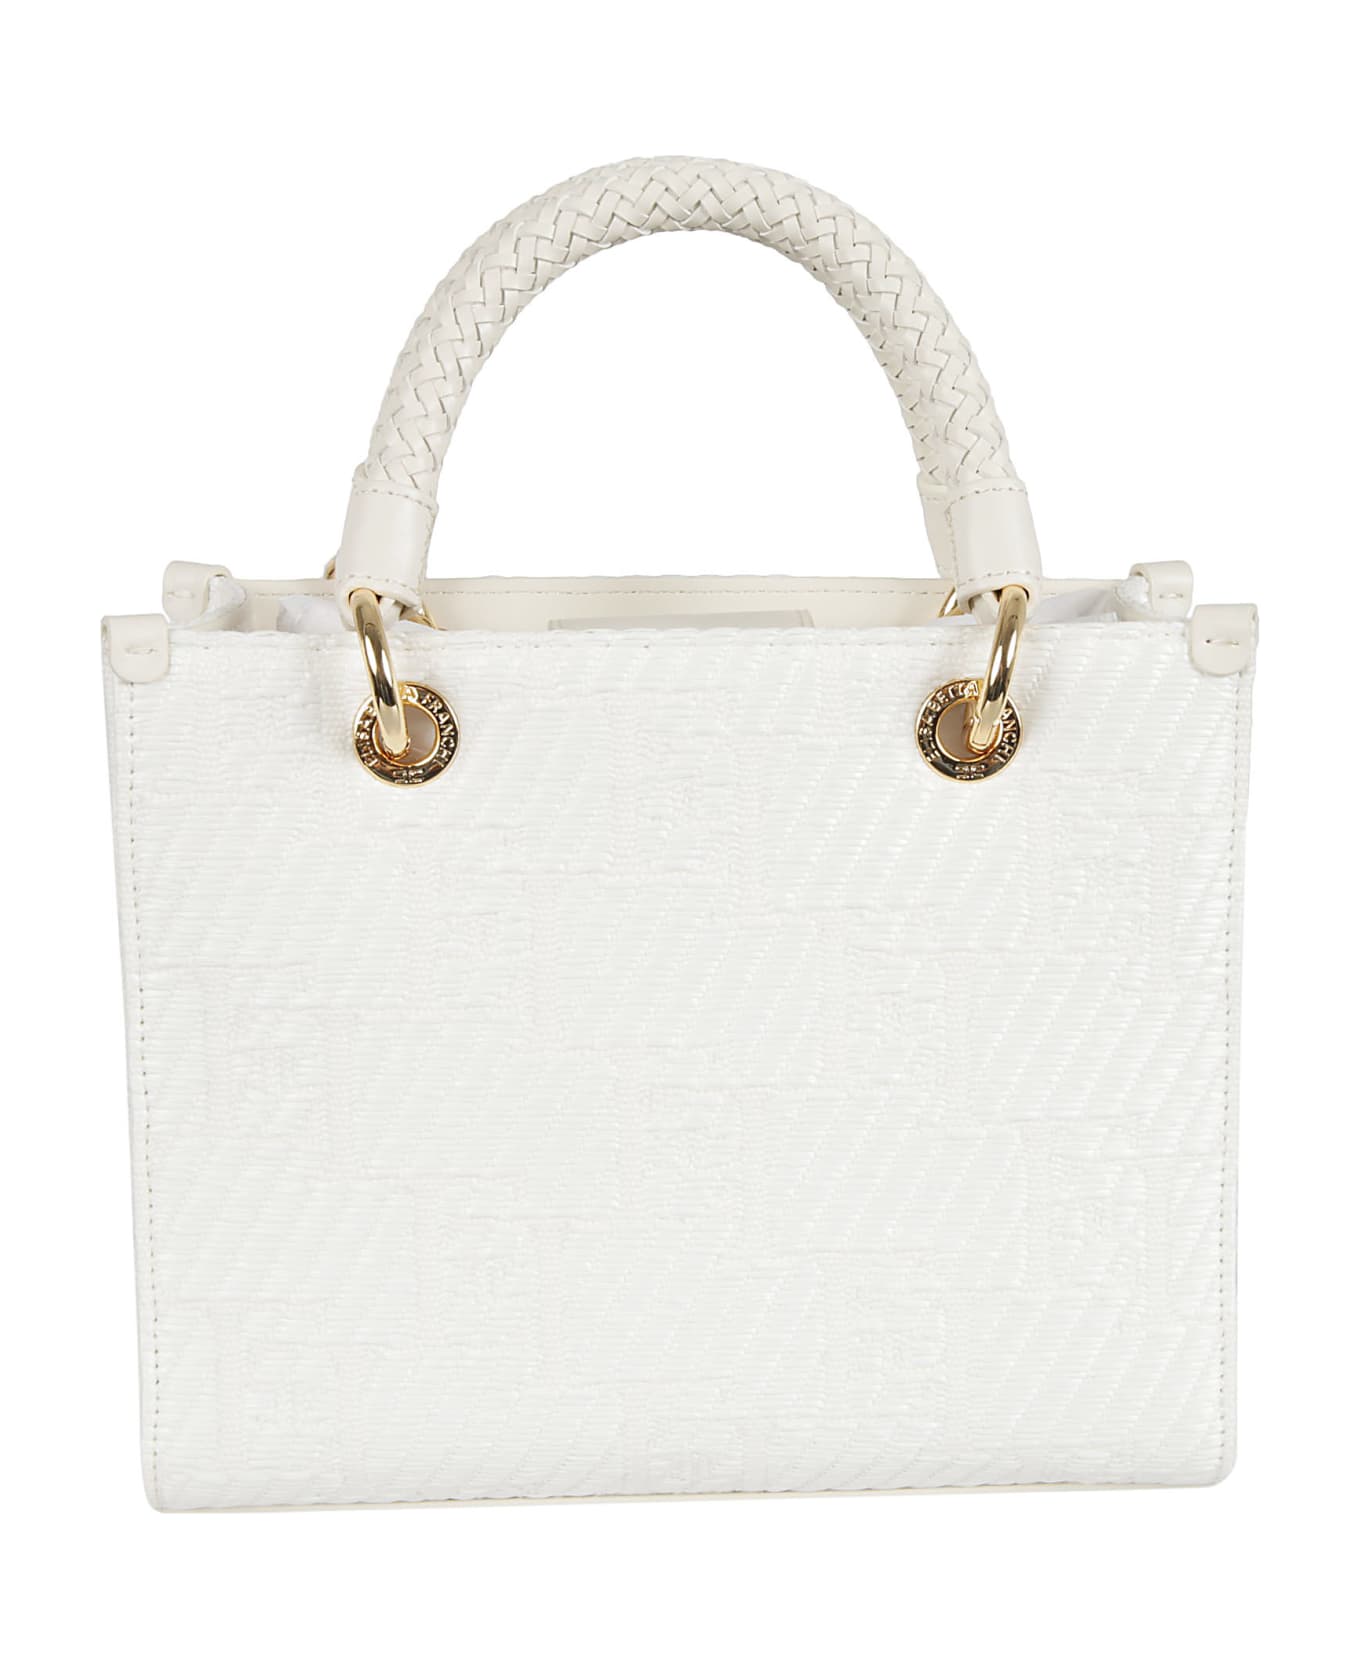 Elisabetta Franchi Woven Top Handle Patterned Tote - Avorio トートバッグ